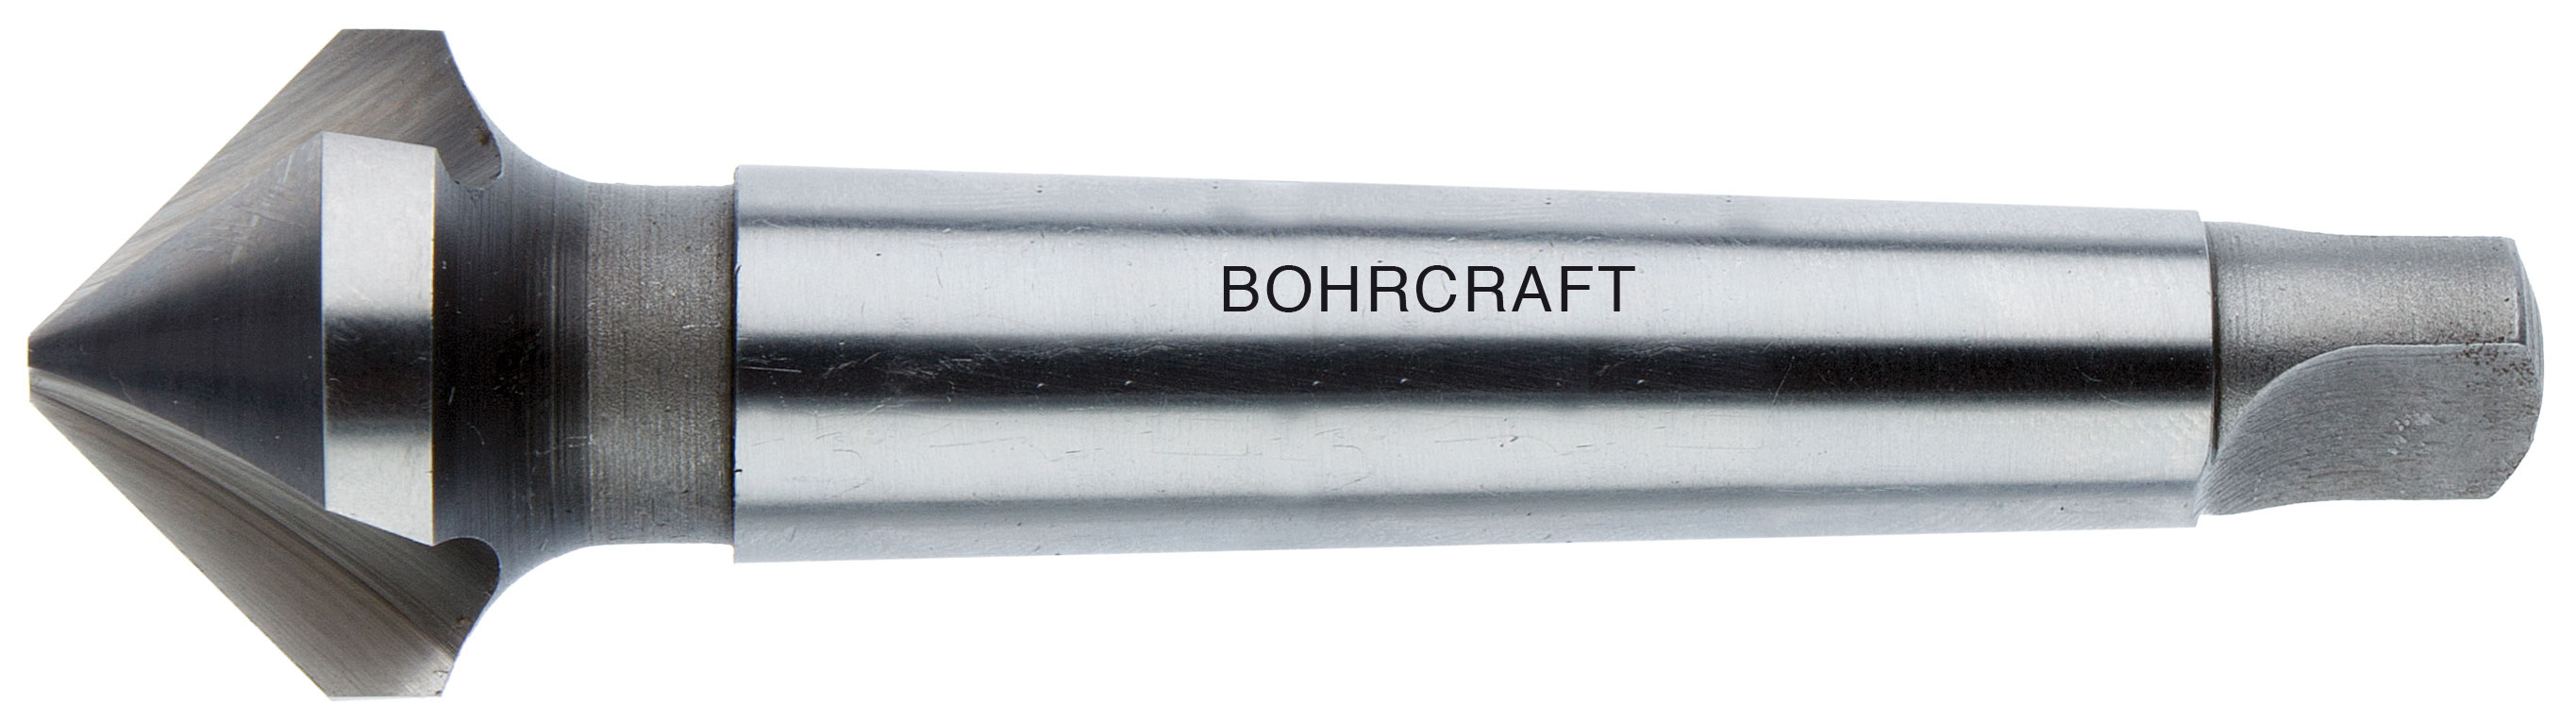 Bohrcraft tools GmbH & Co. KG, Countersinks DIN 335 Type D 90° HSS, with  Taper Shank